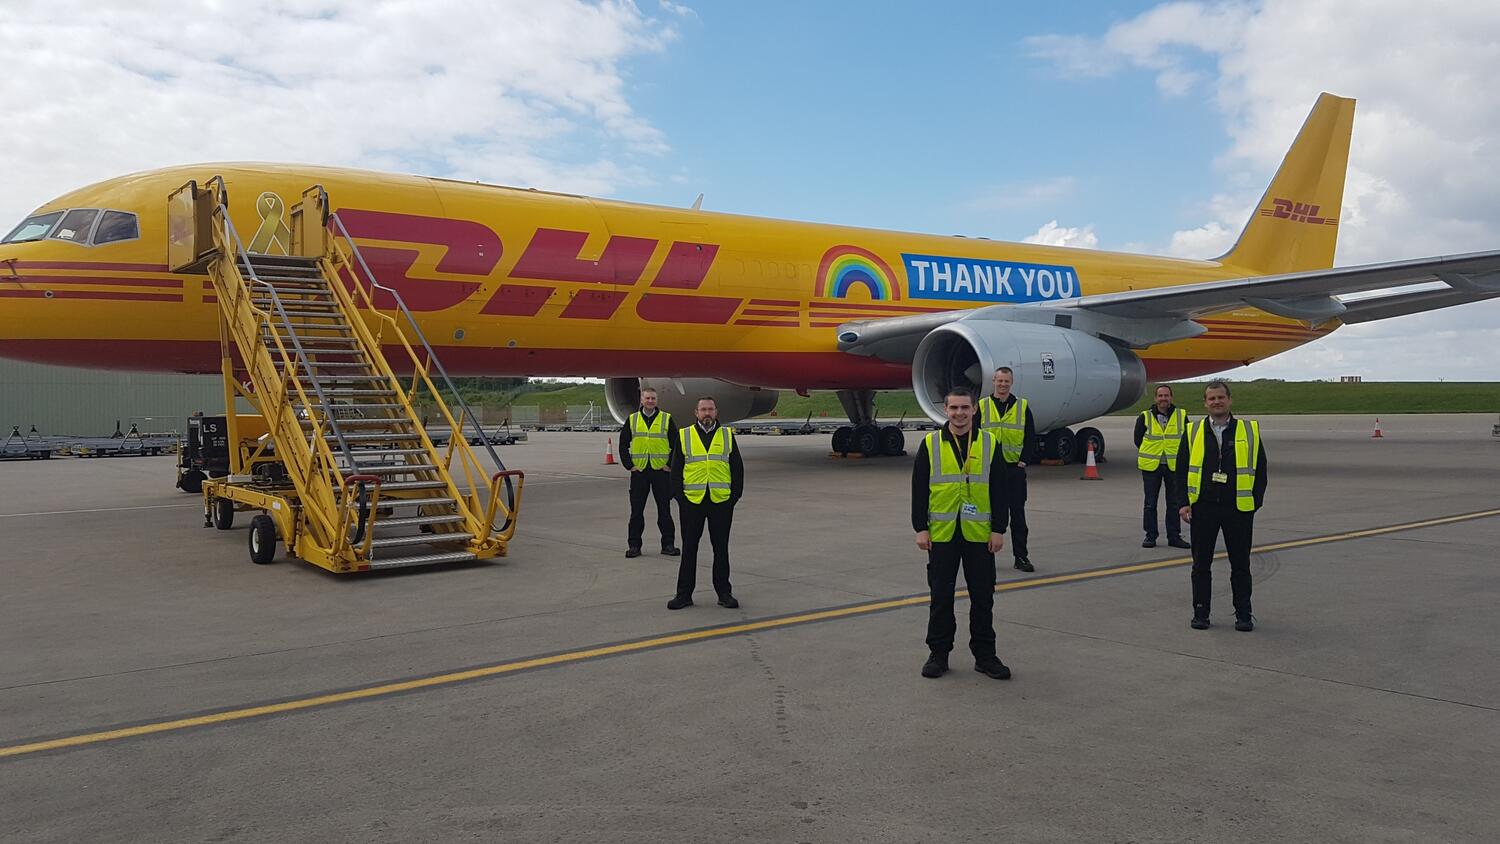  How World’s Best Workplace DHL Deepened Its Commitment To Community in 2020